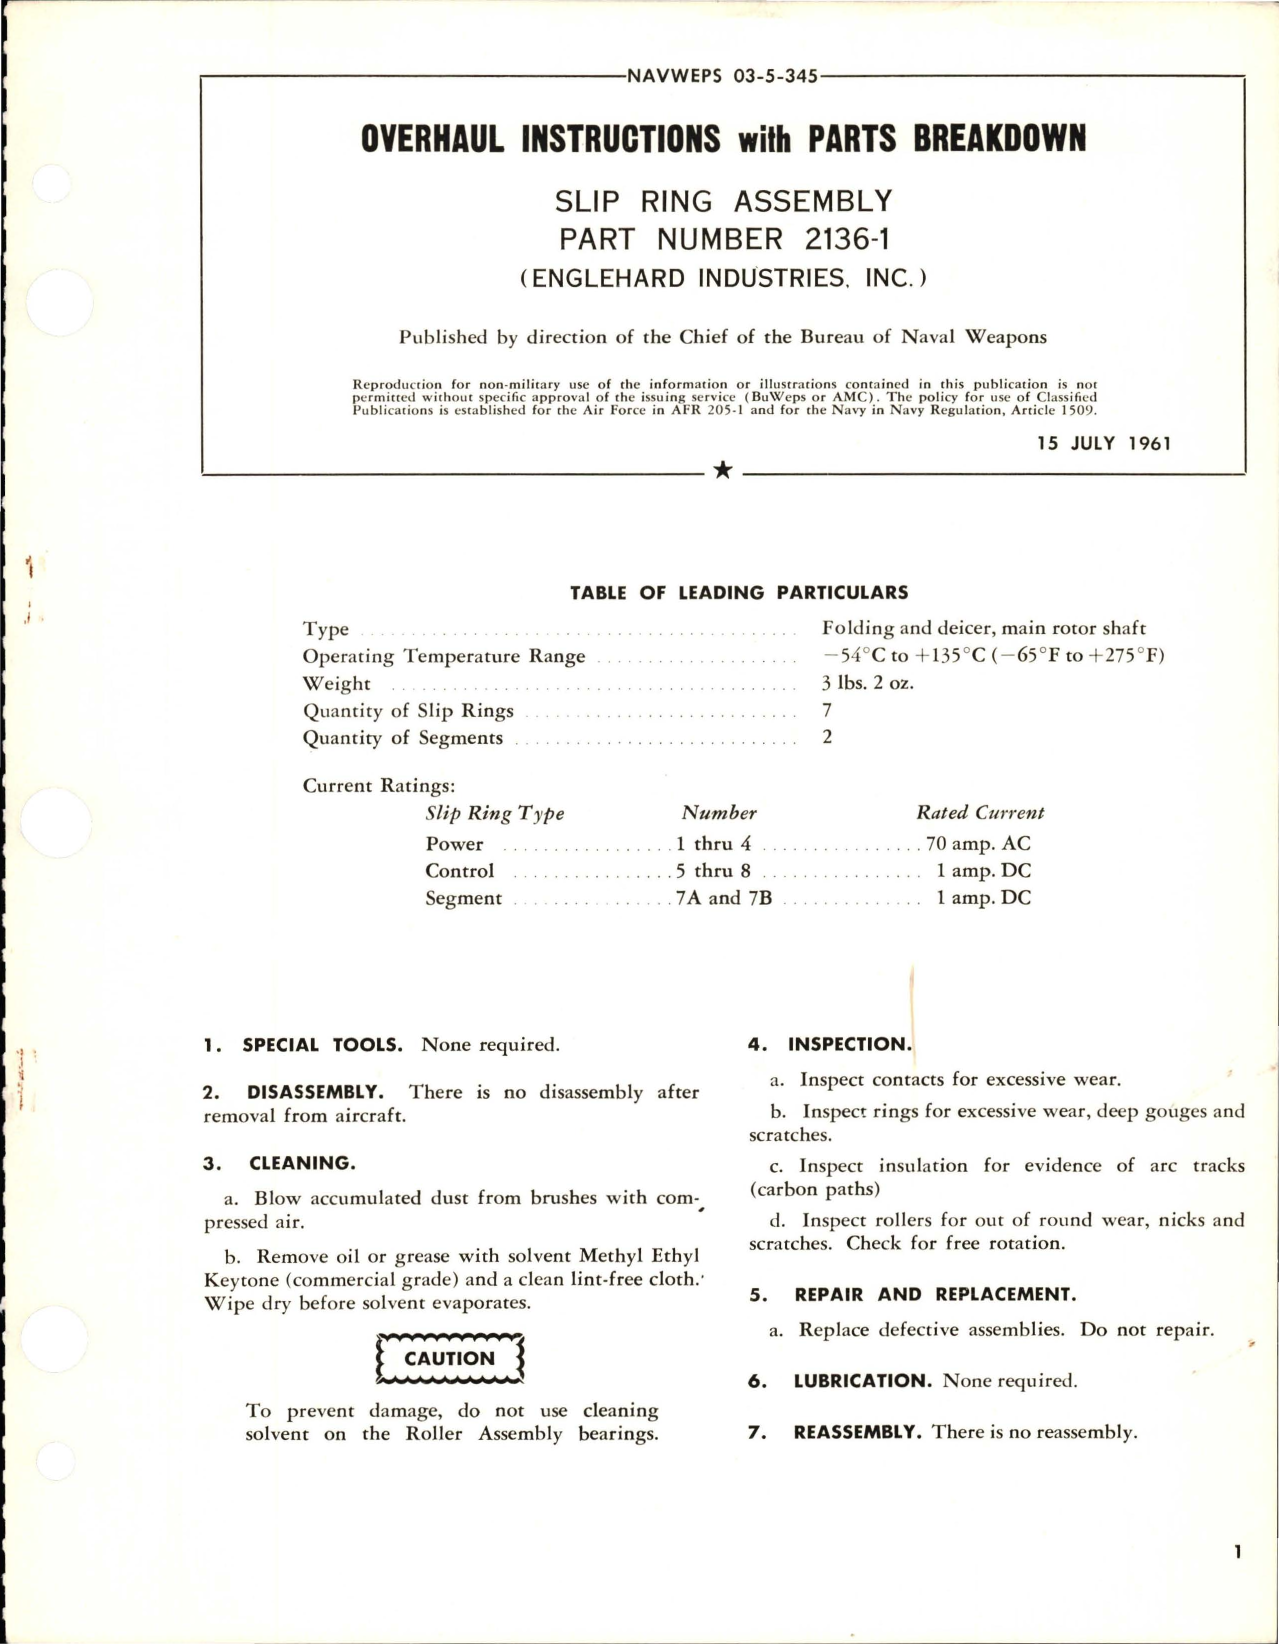 Sample page 1 from AirCorps Library document: Overhaul Instructions with Parts Breakdown for Slip Ring Assembly - Part 2136-1 